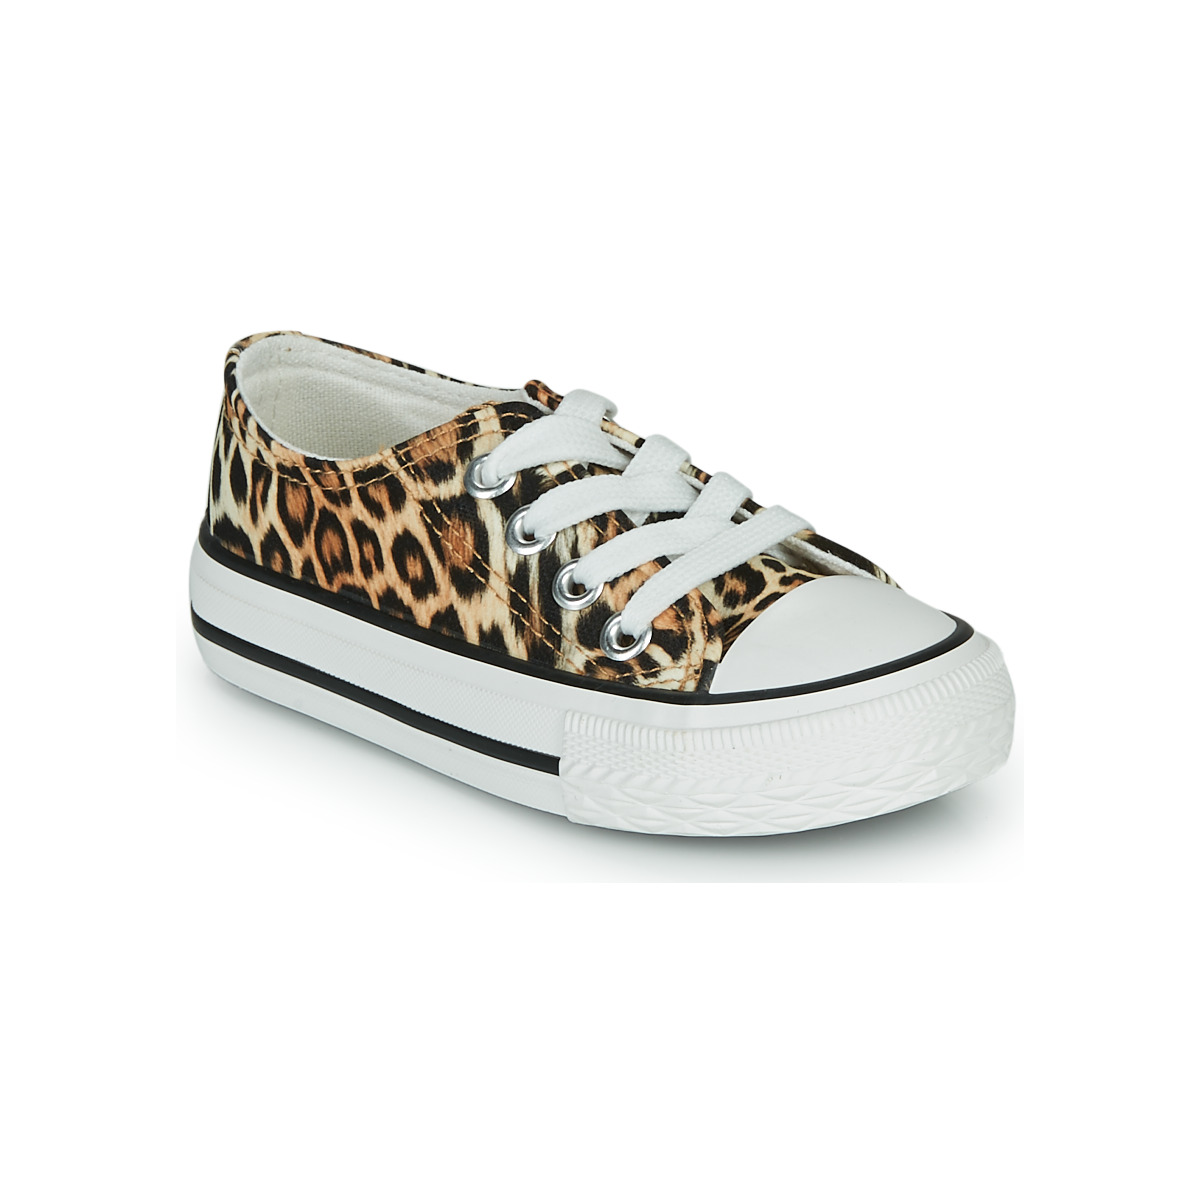 Chaussures Fille Fruit Of The Loo OTAL Leopard